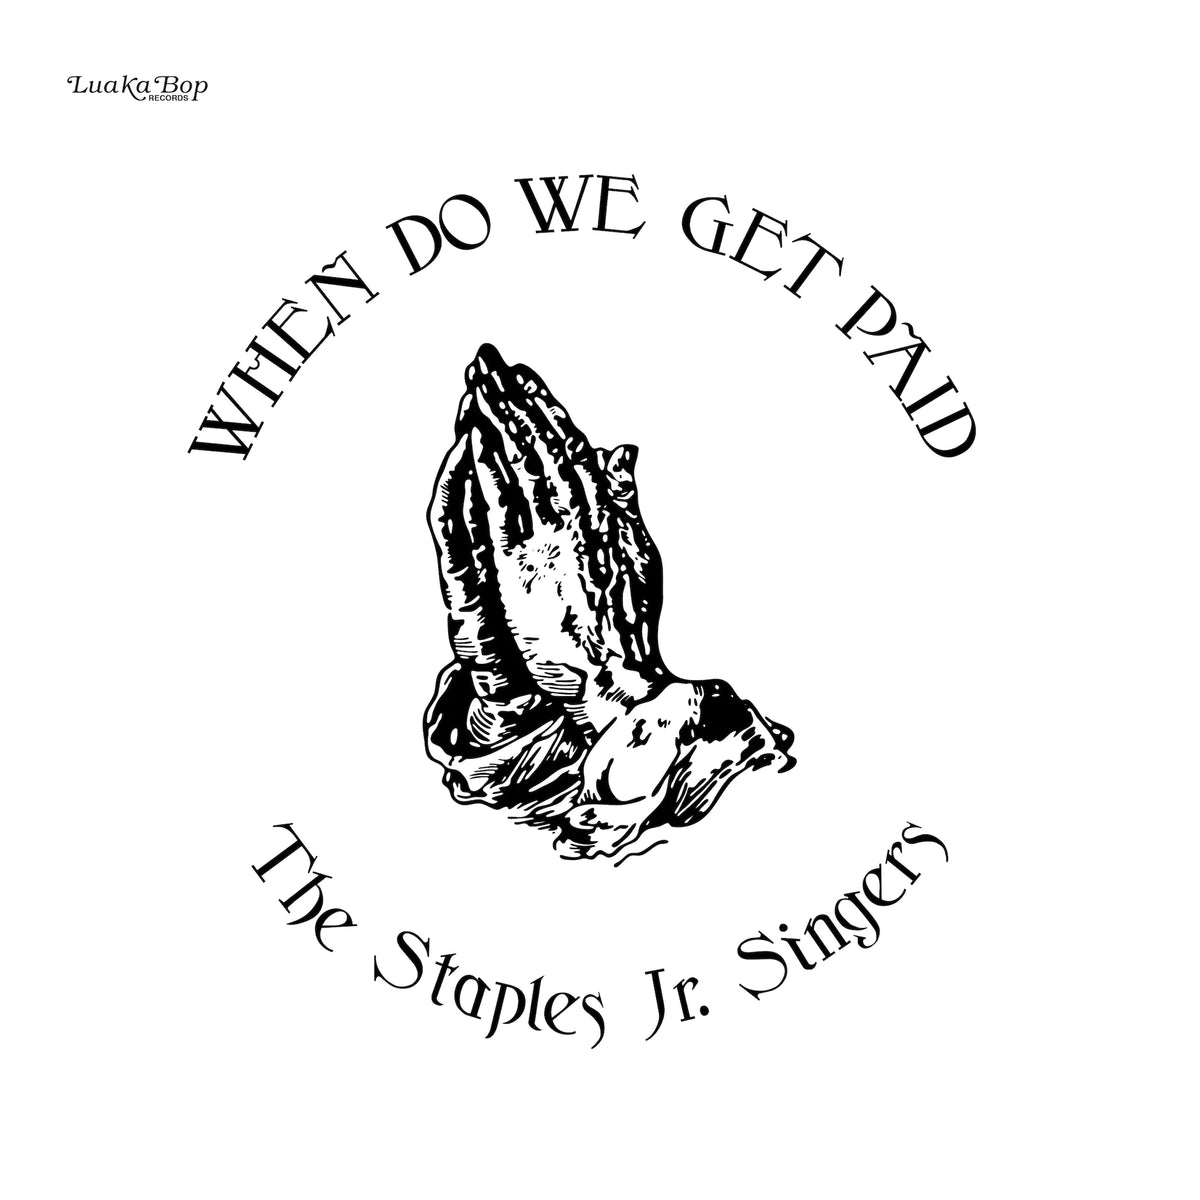 Staples Jr Singers - When Do We Get Paid